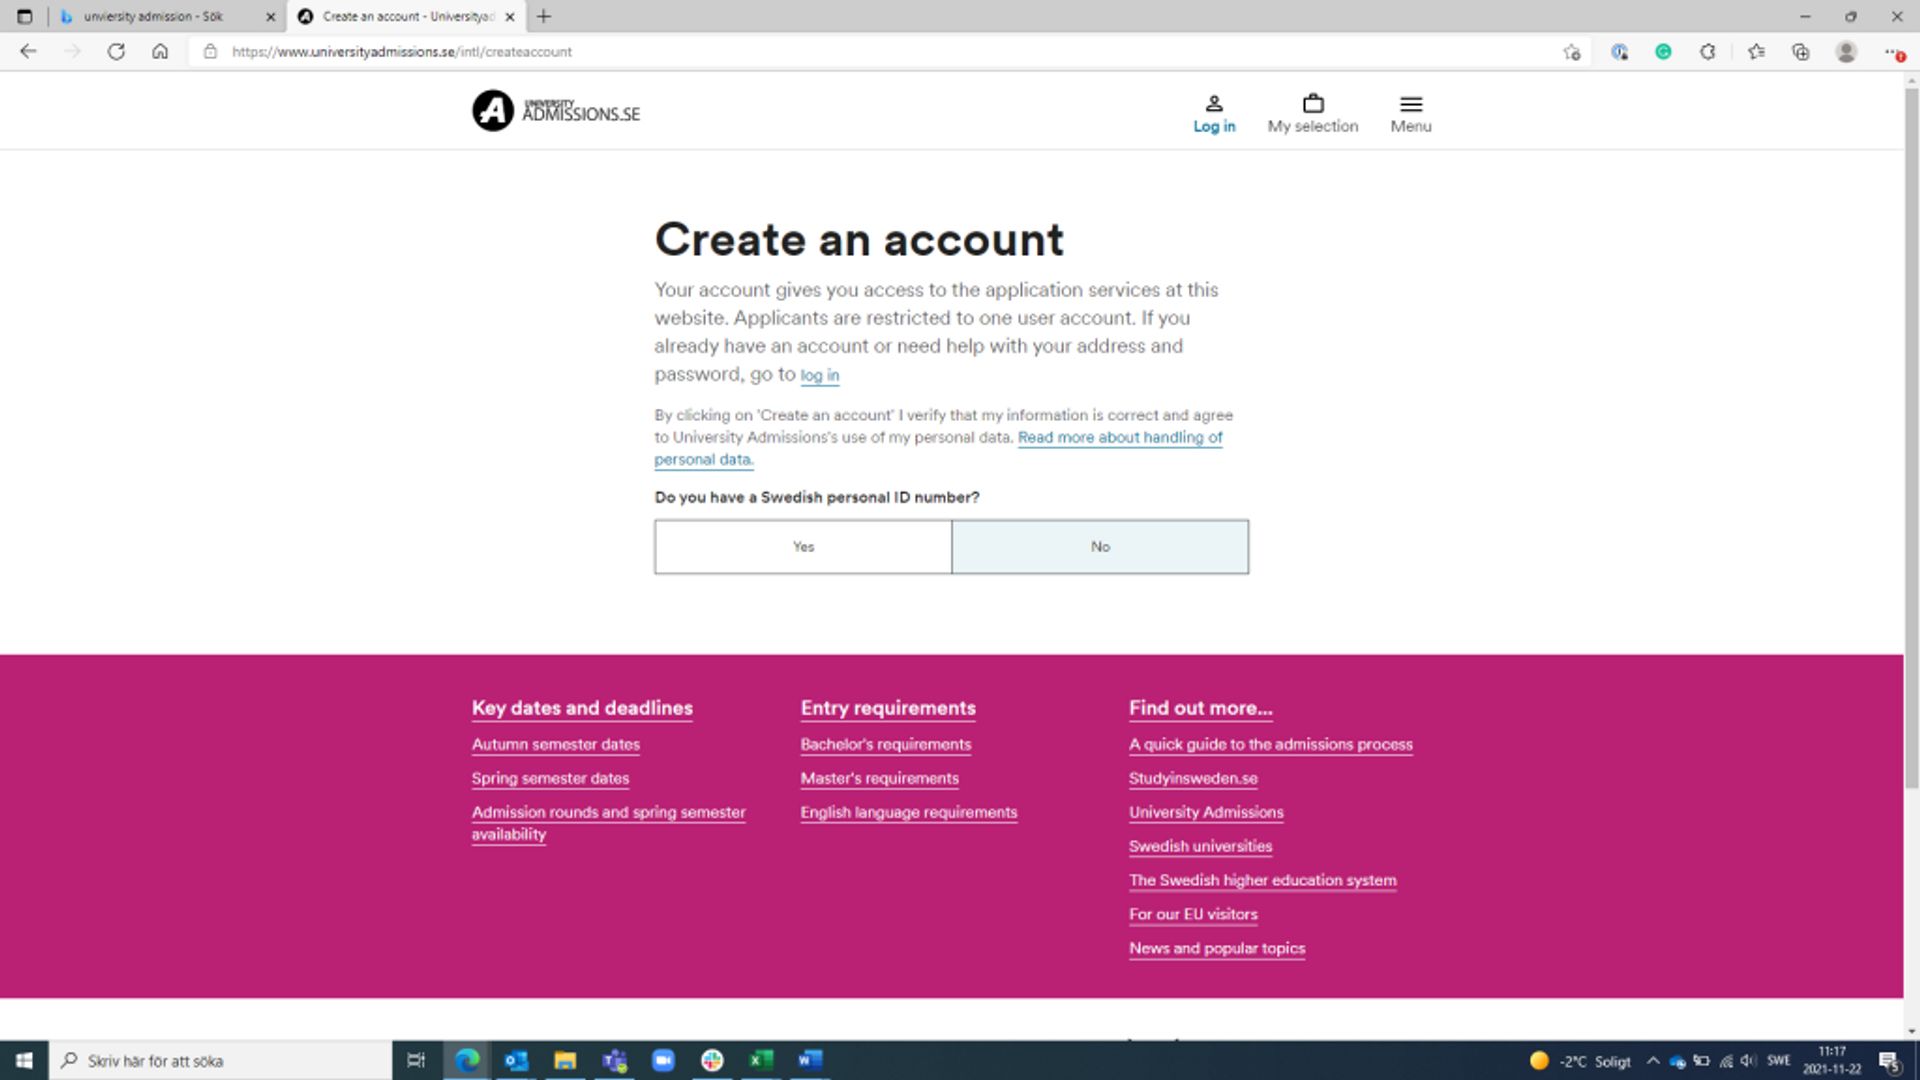 Screenshot showing how to create an account on University Admissions.